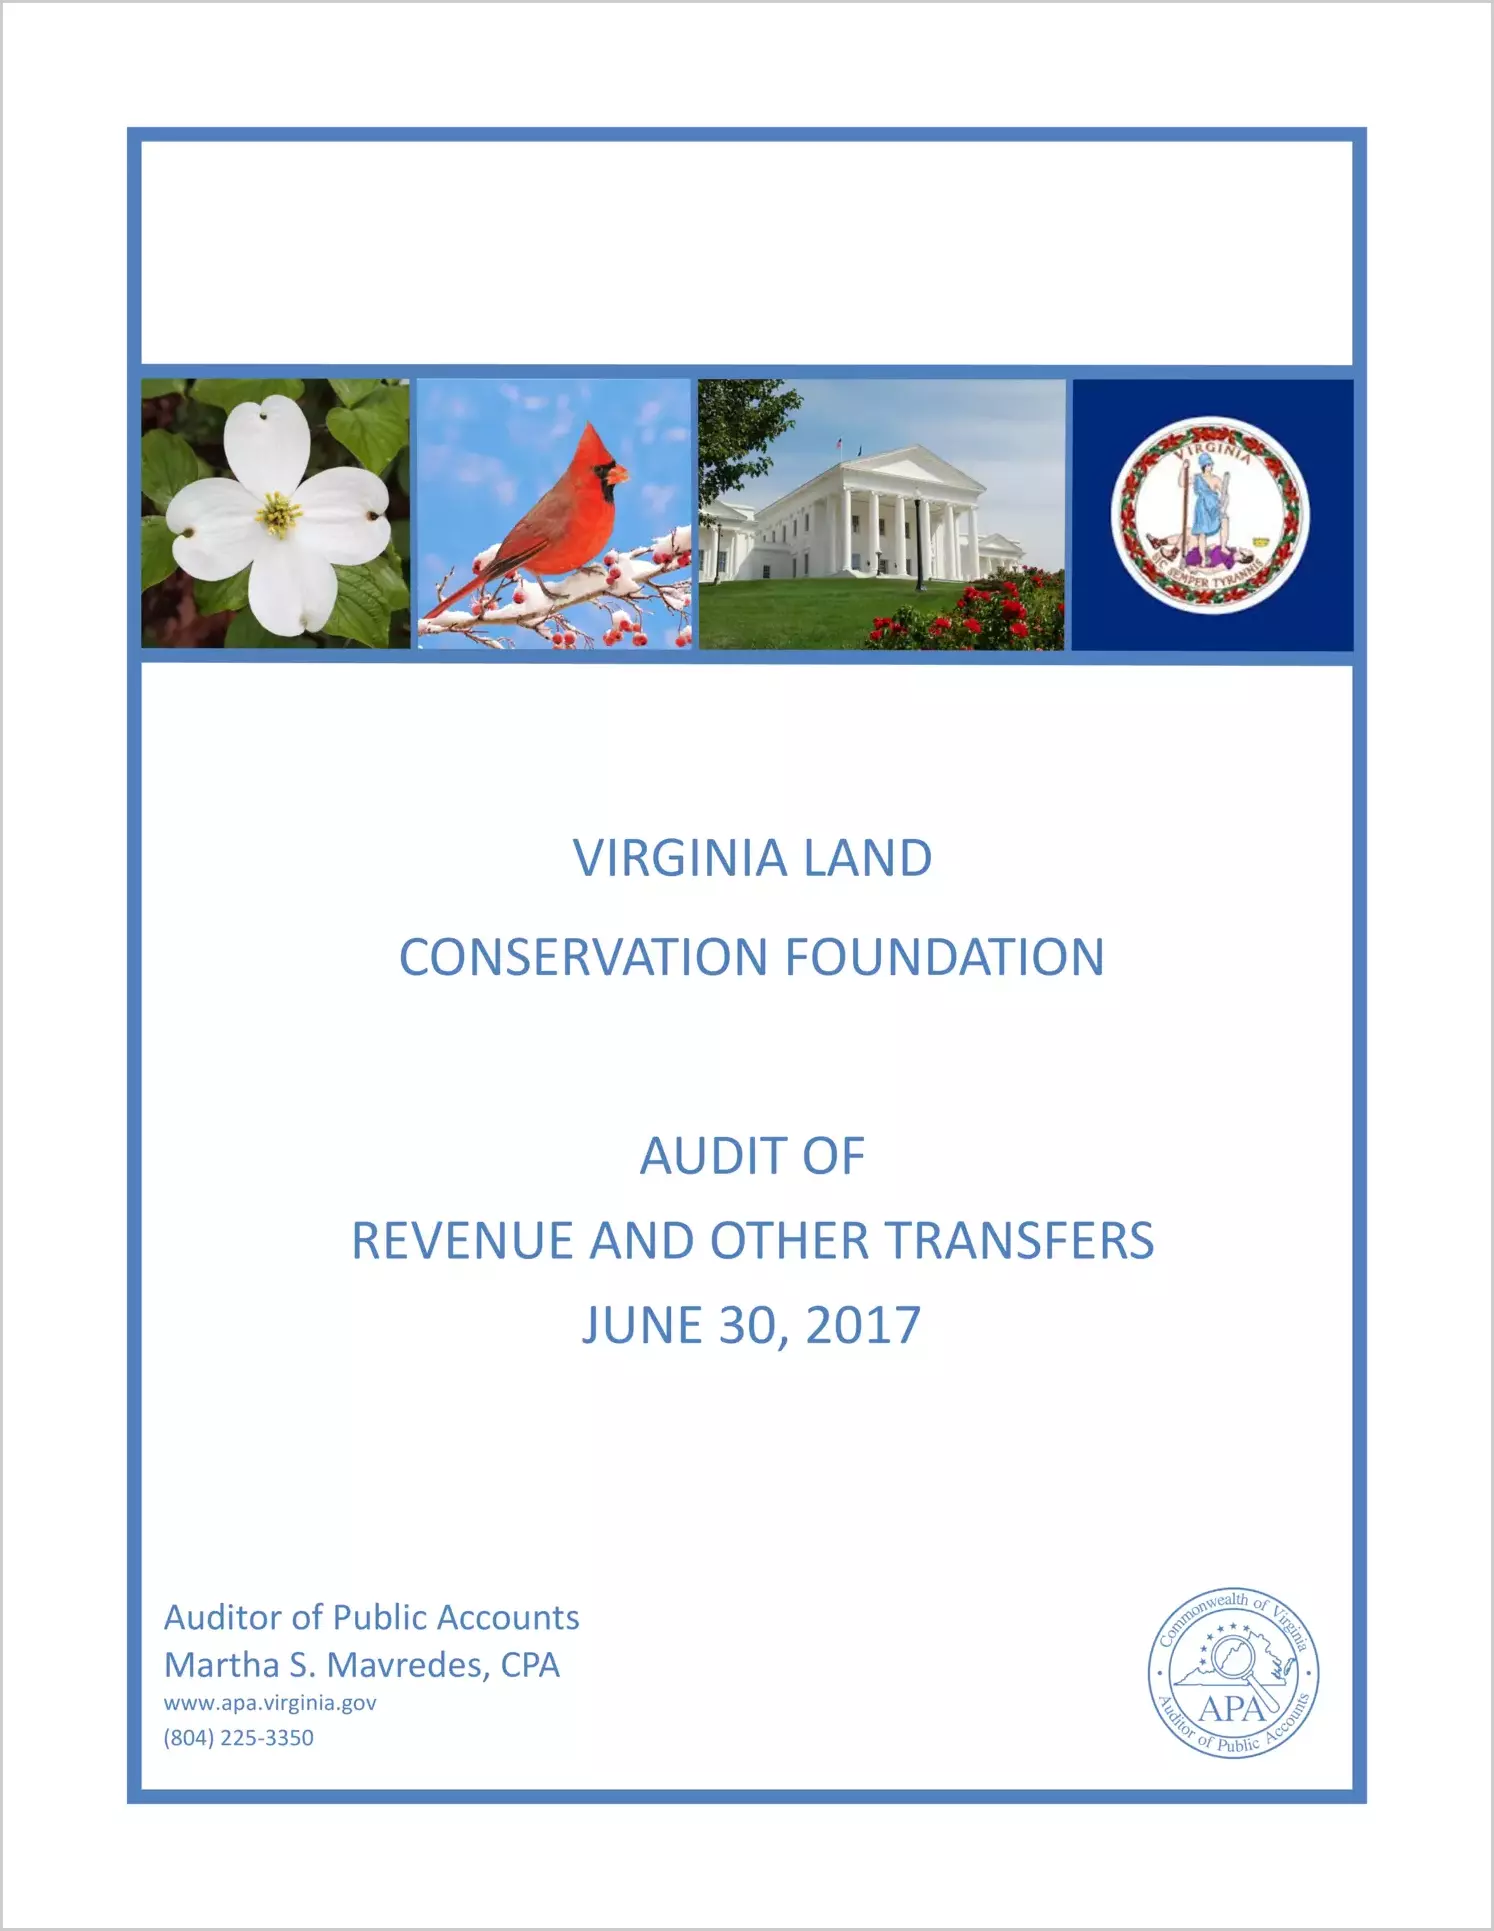 Virginia Land Conservation Foundation Audit of Revenue and other Transfers as of June 30, 2017